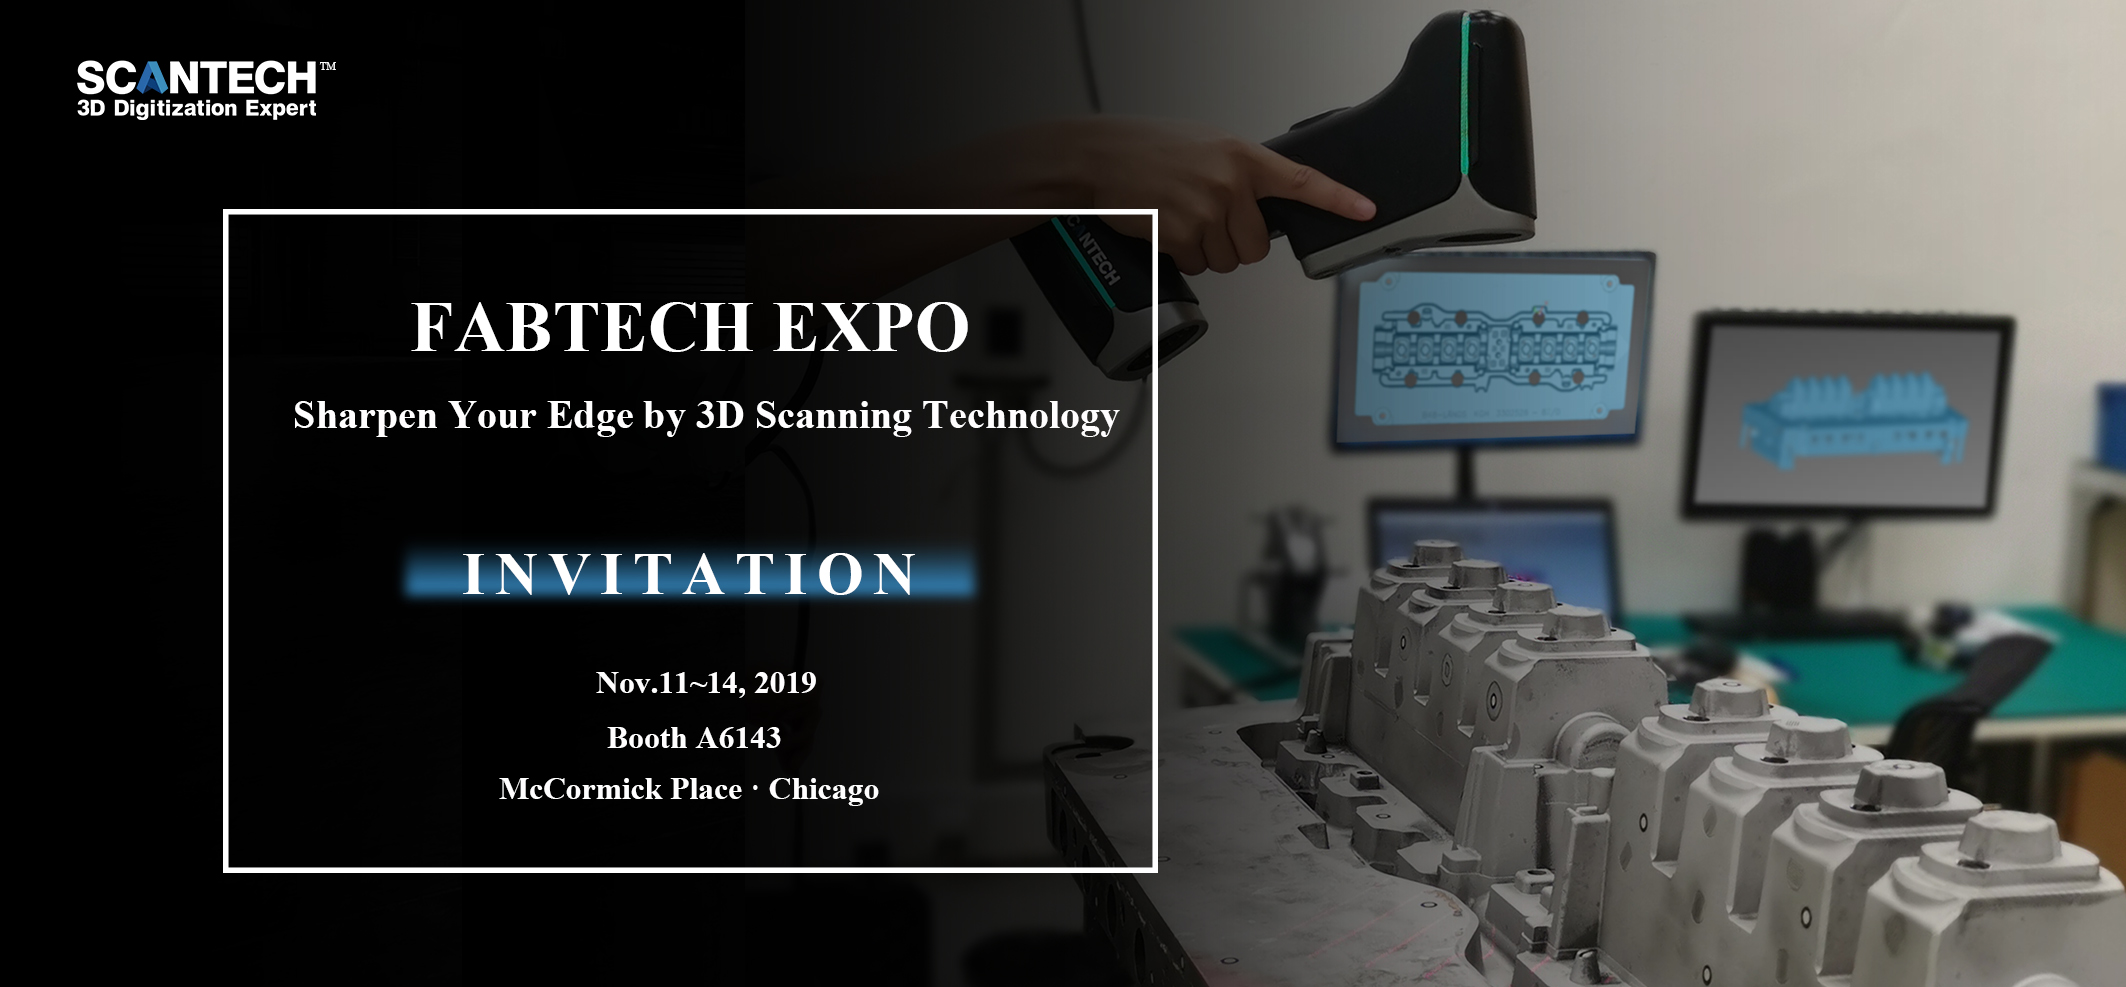 FABTECH EXPO sharpen your edge by 3d scanning technology